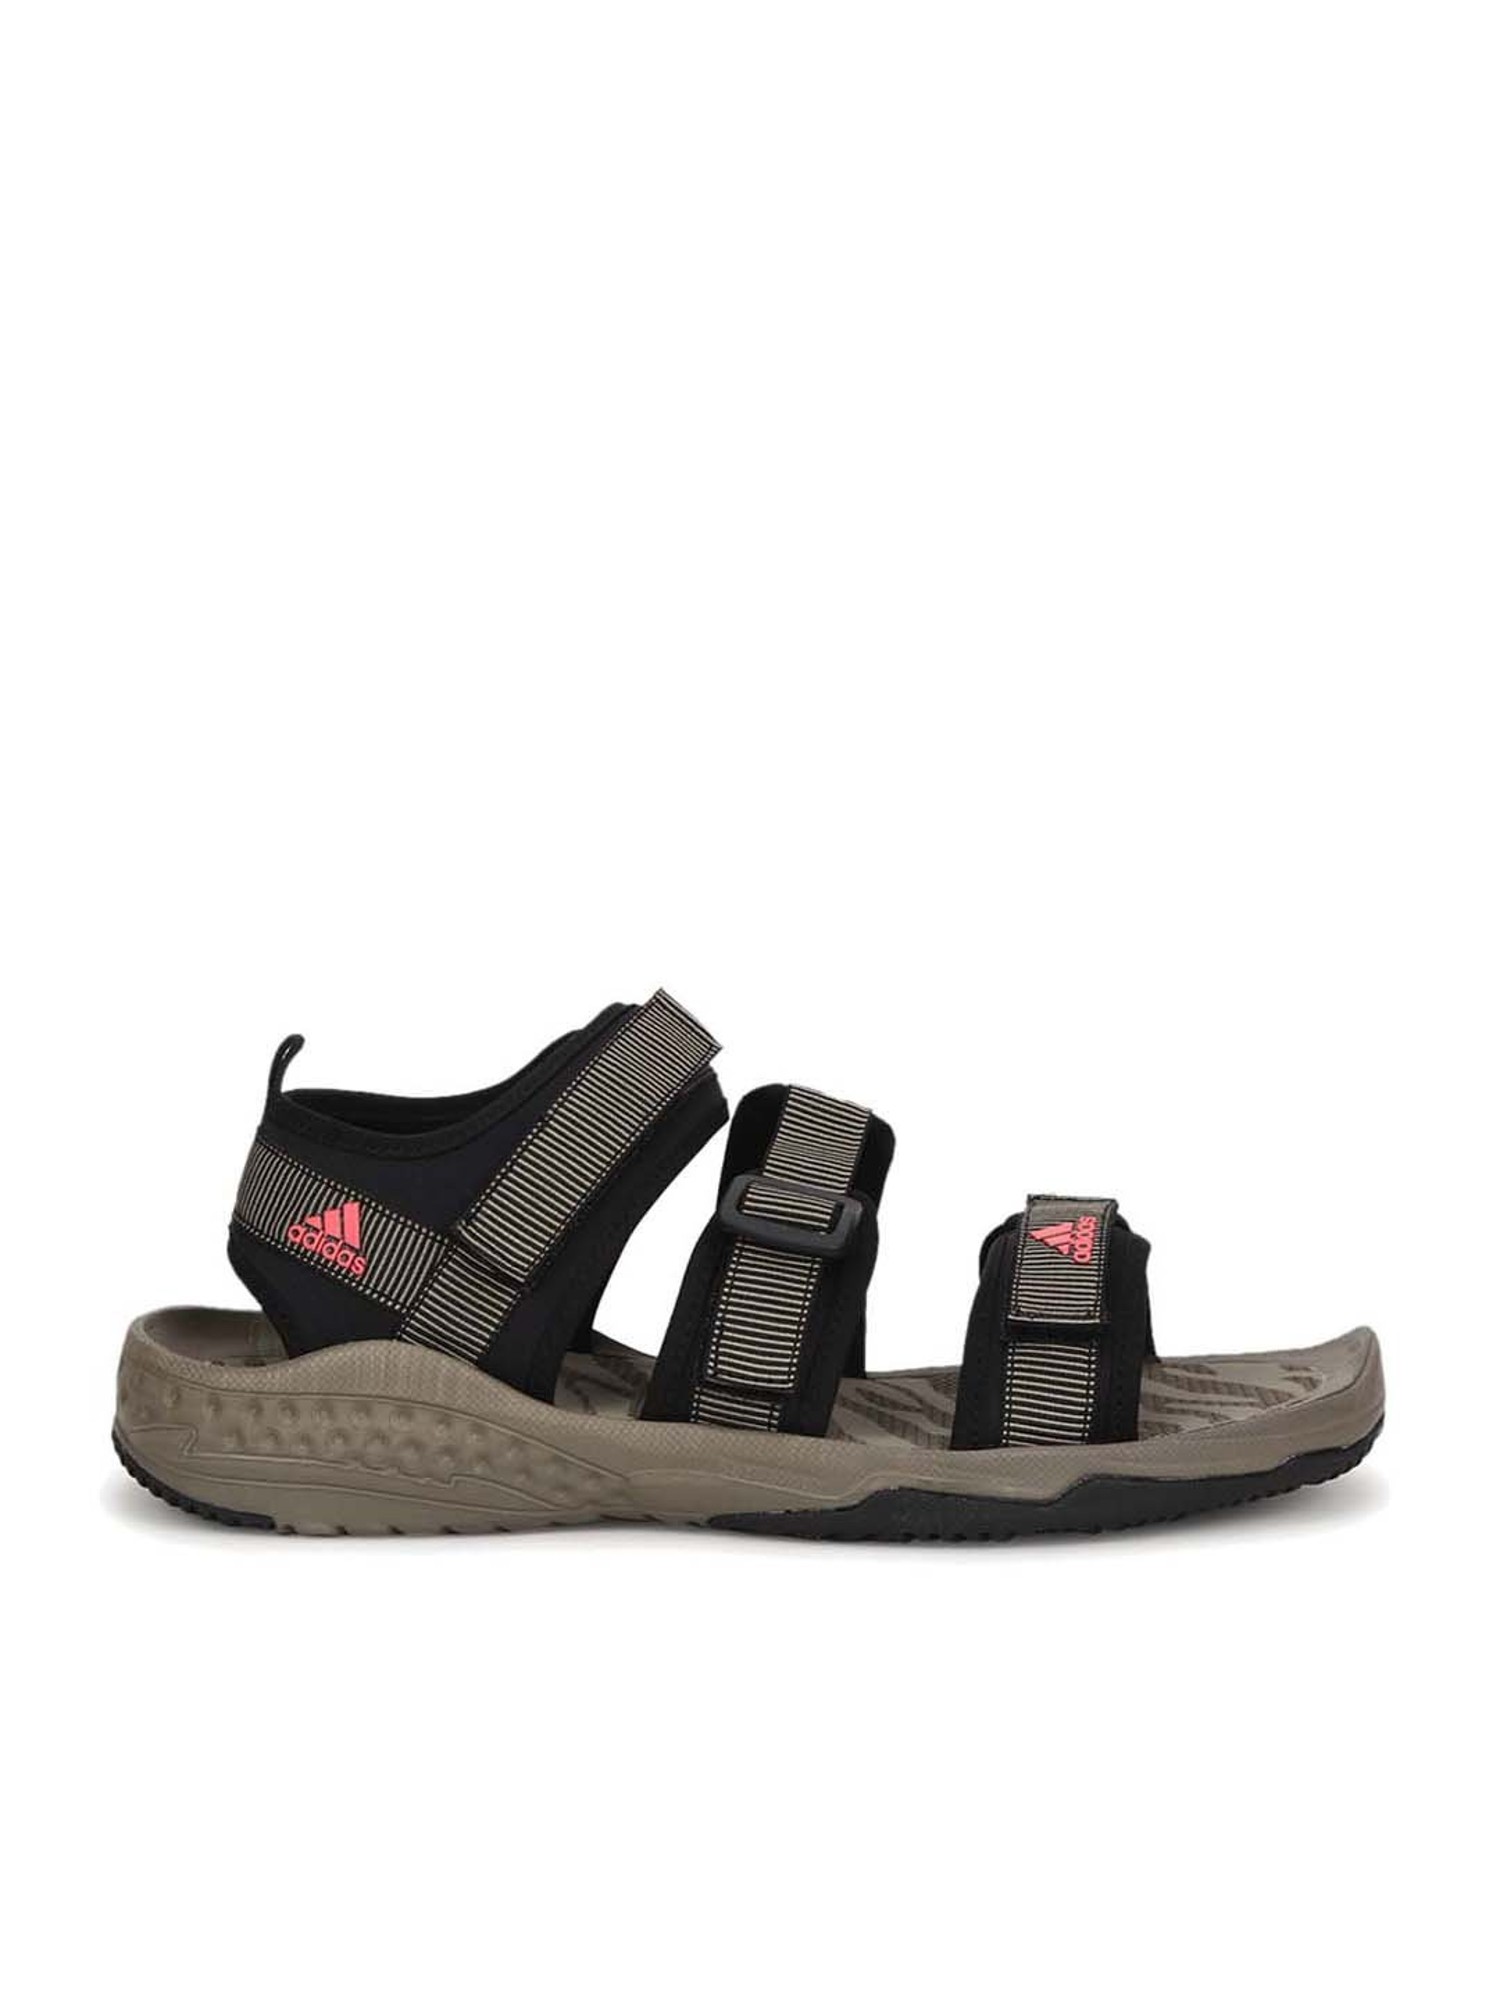 adidas Sandals for Women